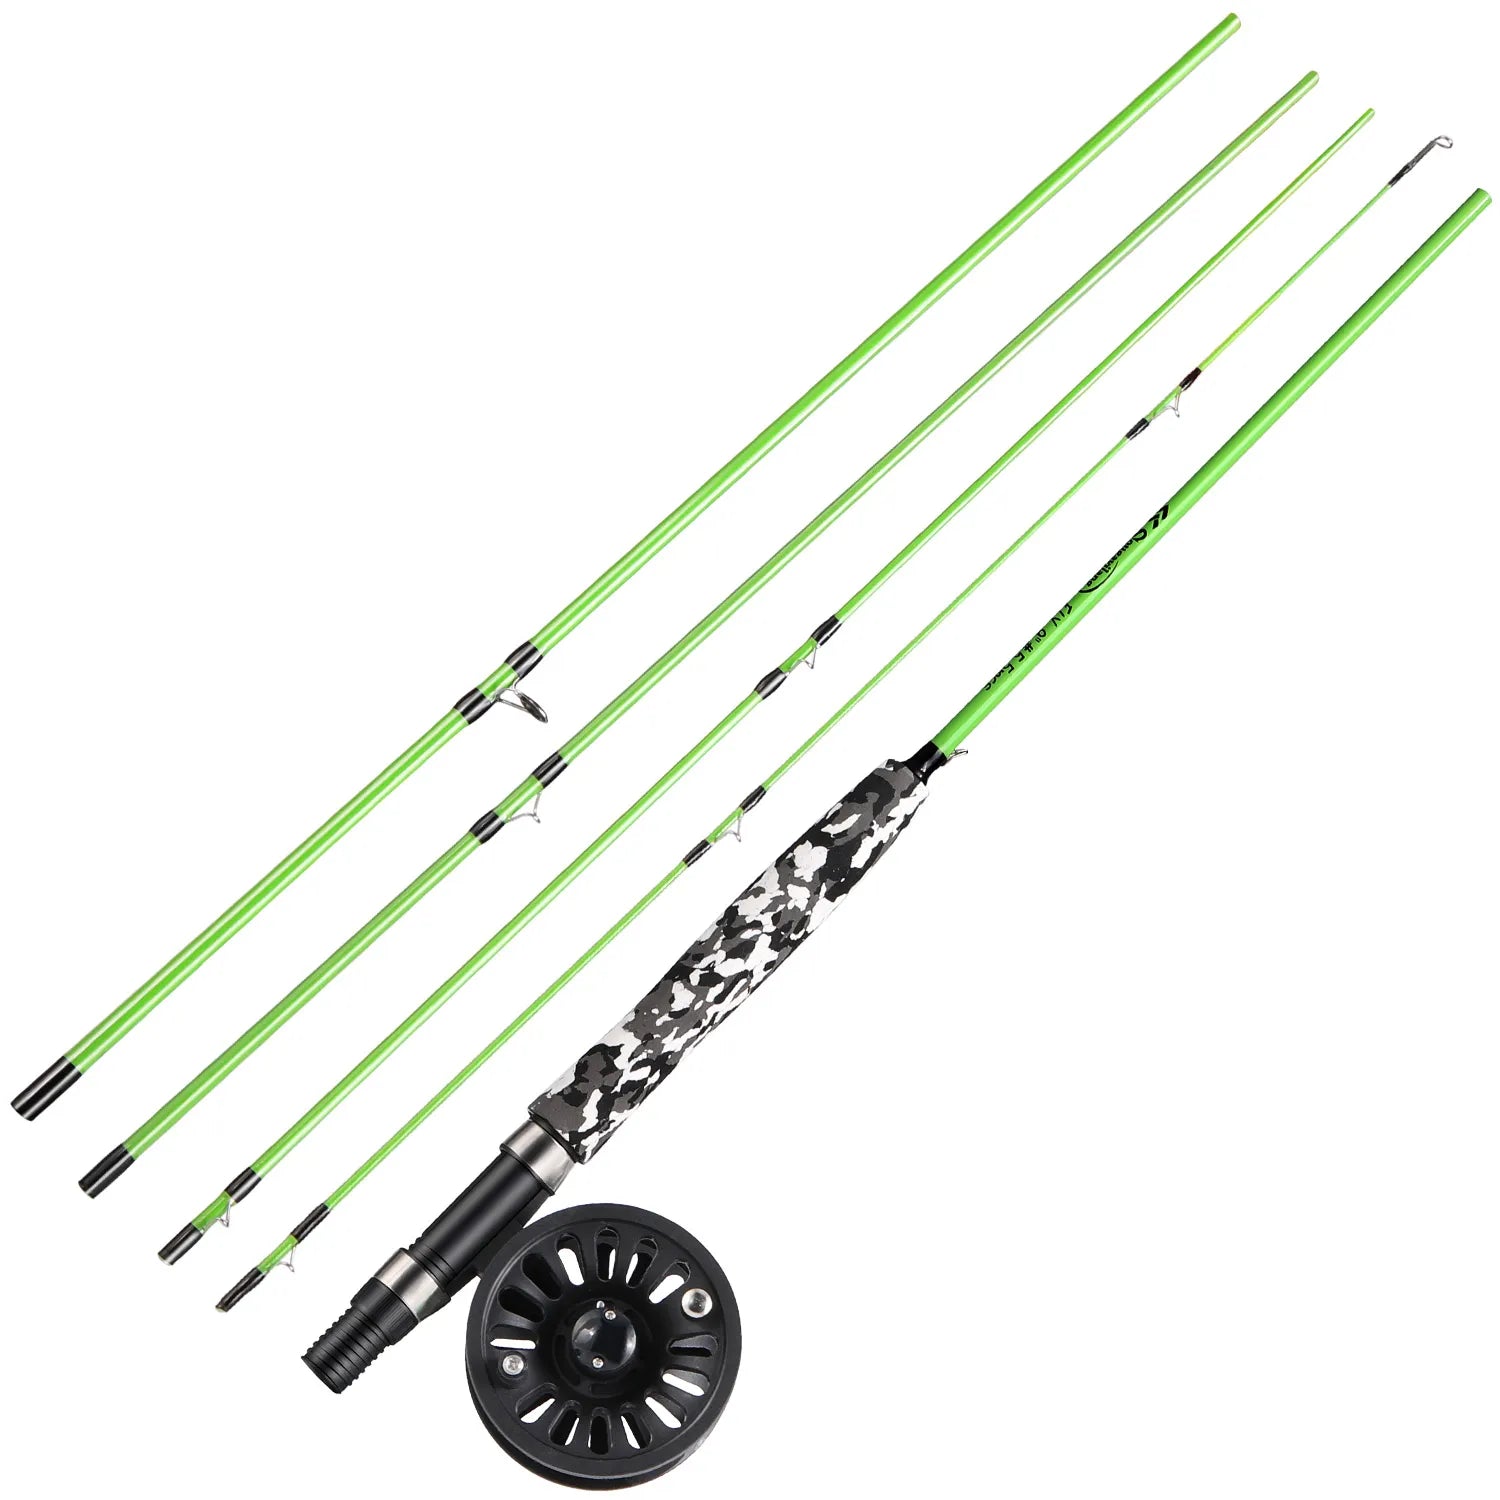 2 Fly Fishing Rods Reels metal Japan, Laurentides 5/6, trout set up,  stunning 